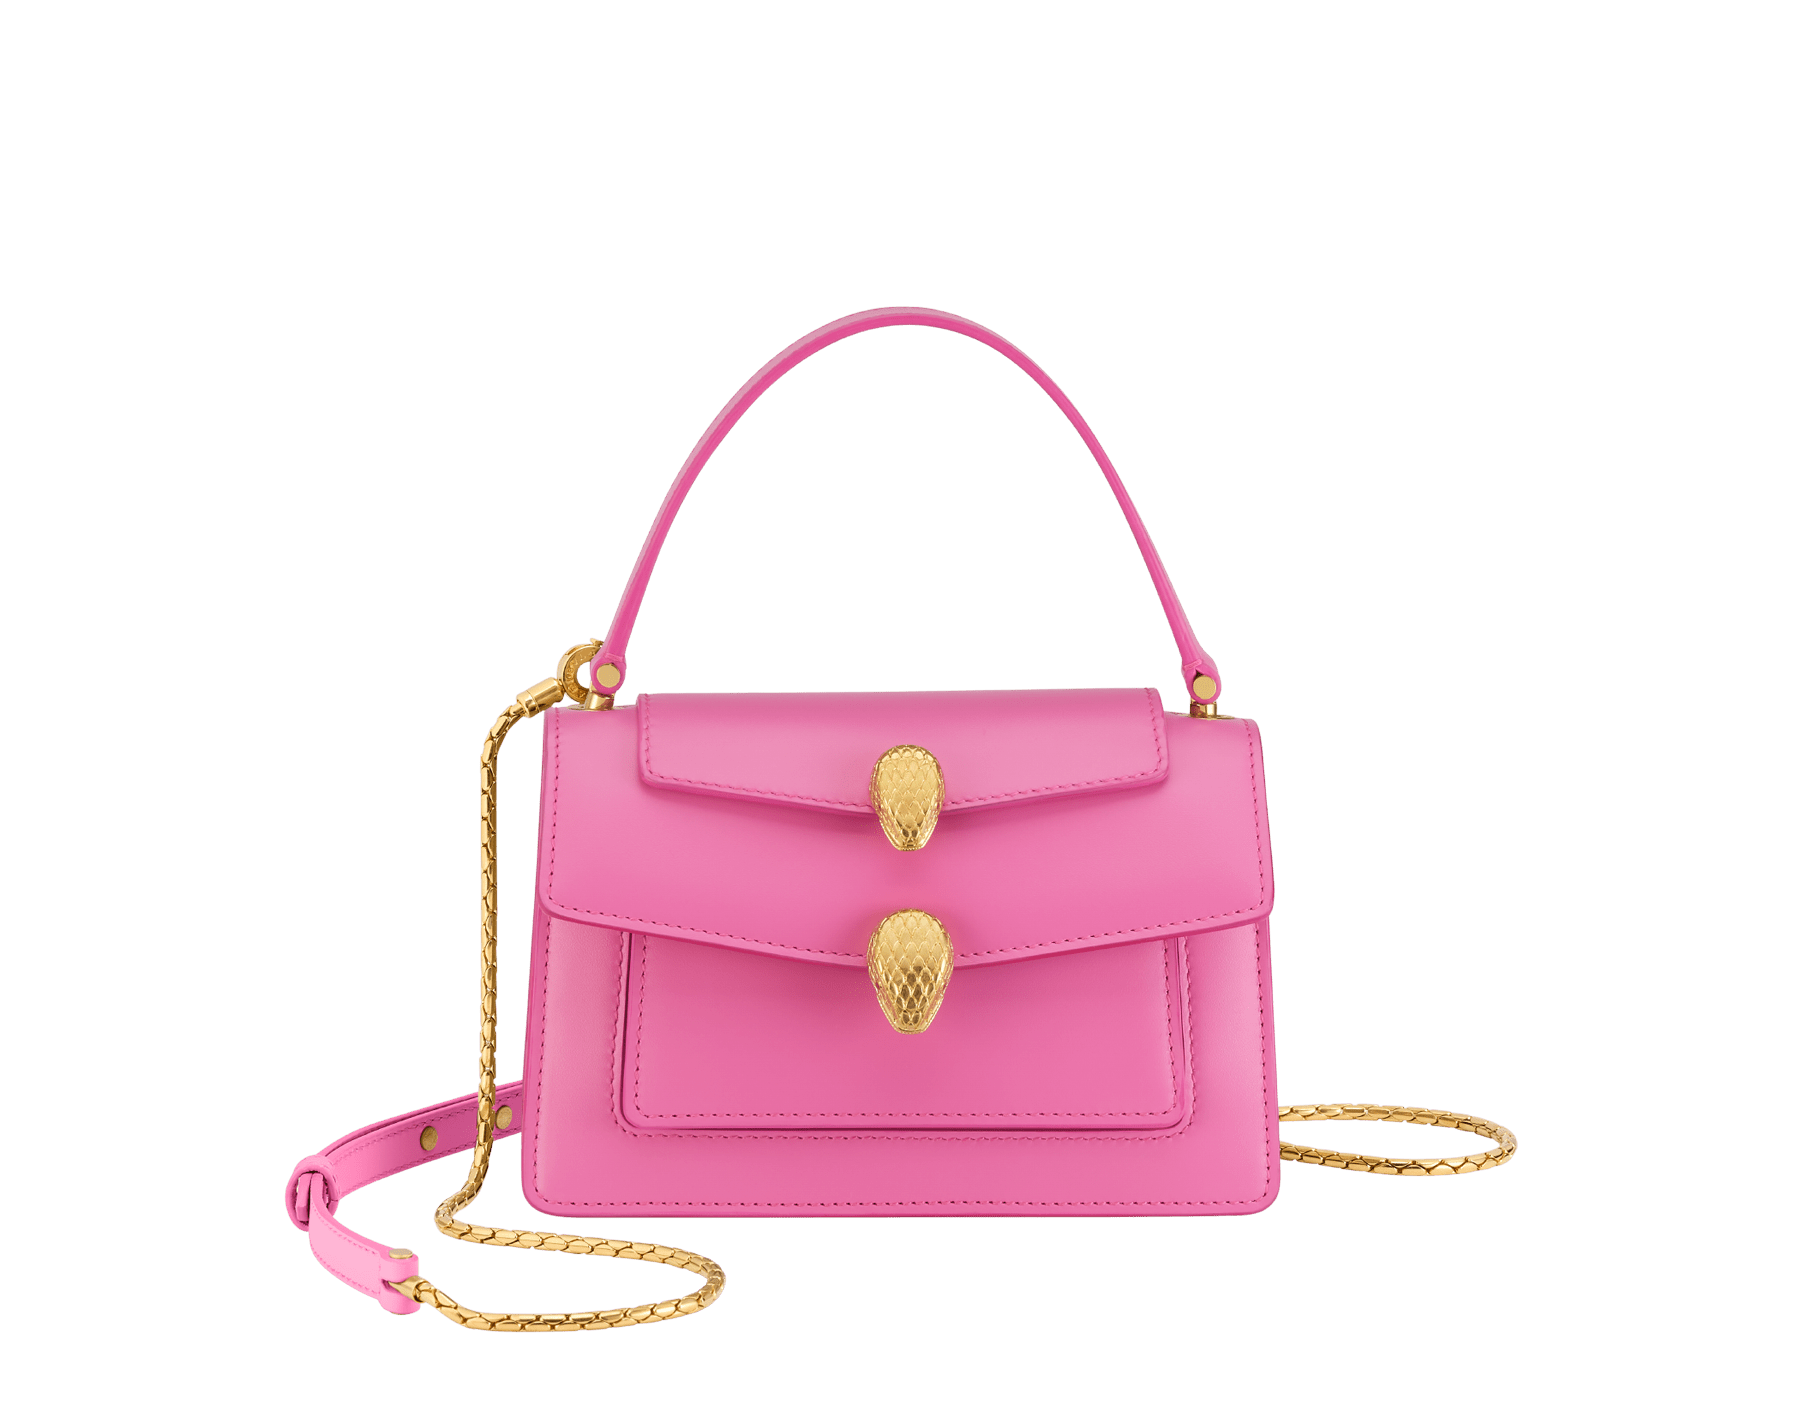 Alexander Wang x Bulgari small belt bag in azalea quartz pink calf leather with black nappa leather lining. Captivating double Serpenti head magnetic closure in antique gold-plated brass embellished with red enamel eyes. 292314 image 1